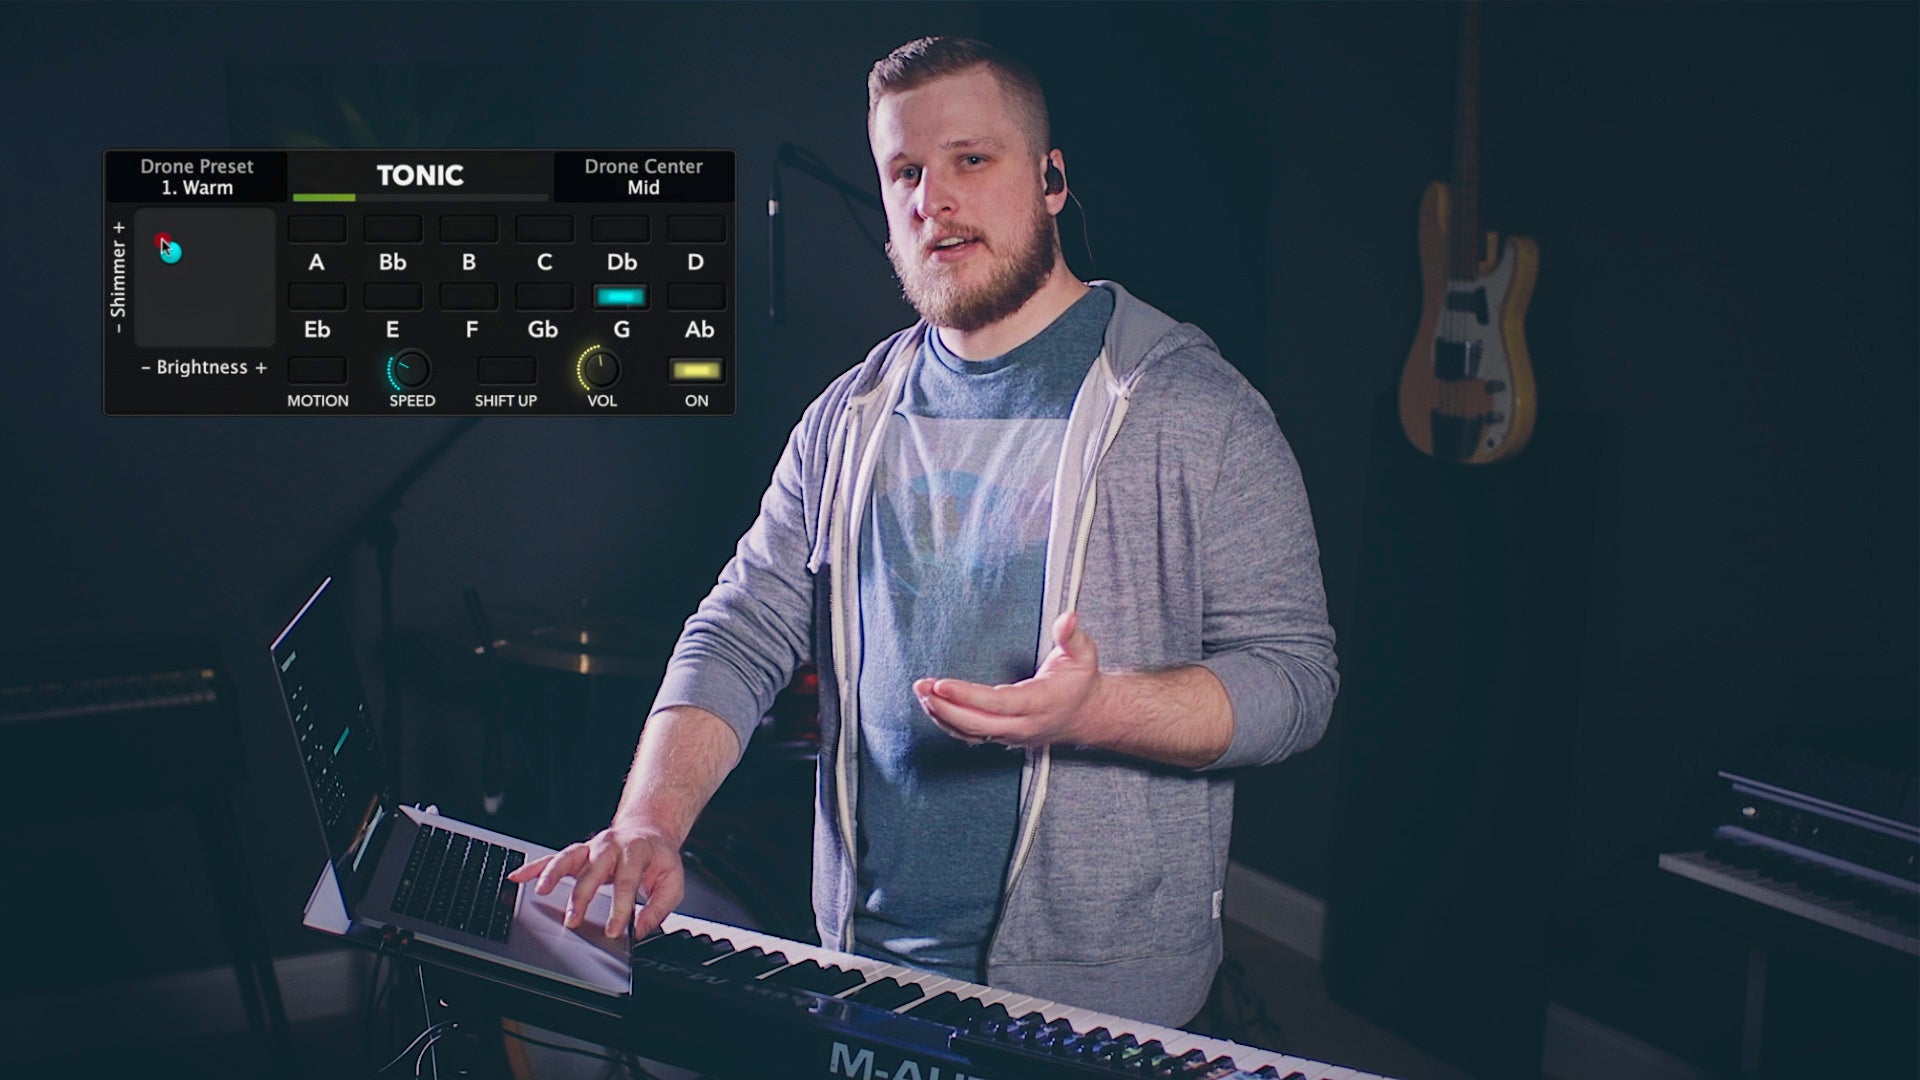 Sunday Keys Version 2: Easy Transitions with the Tonic Pad Generator!